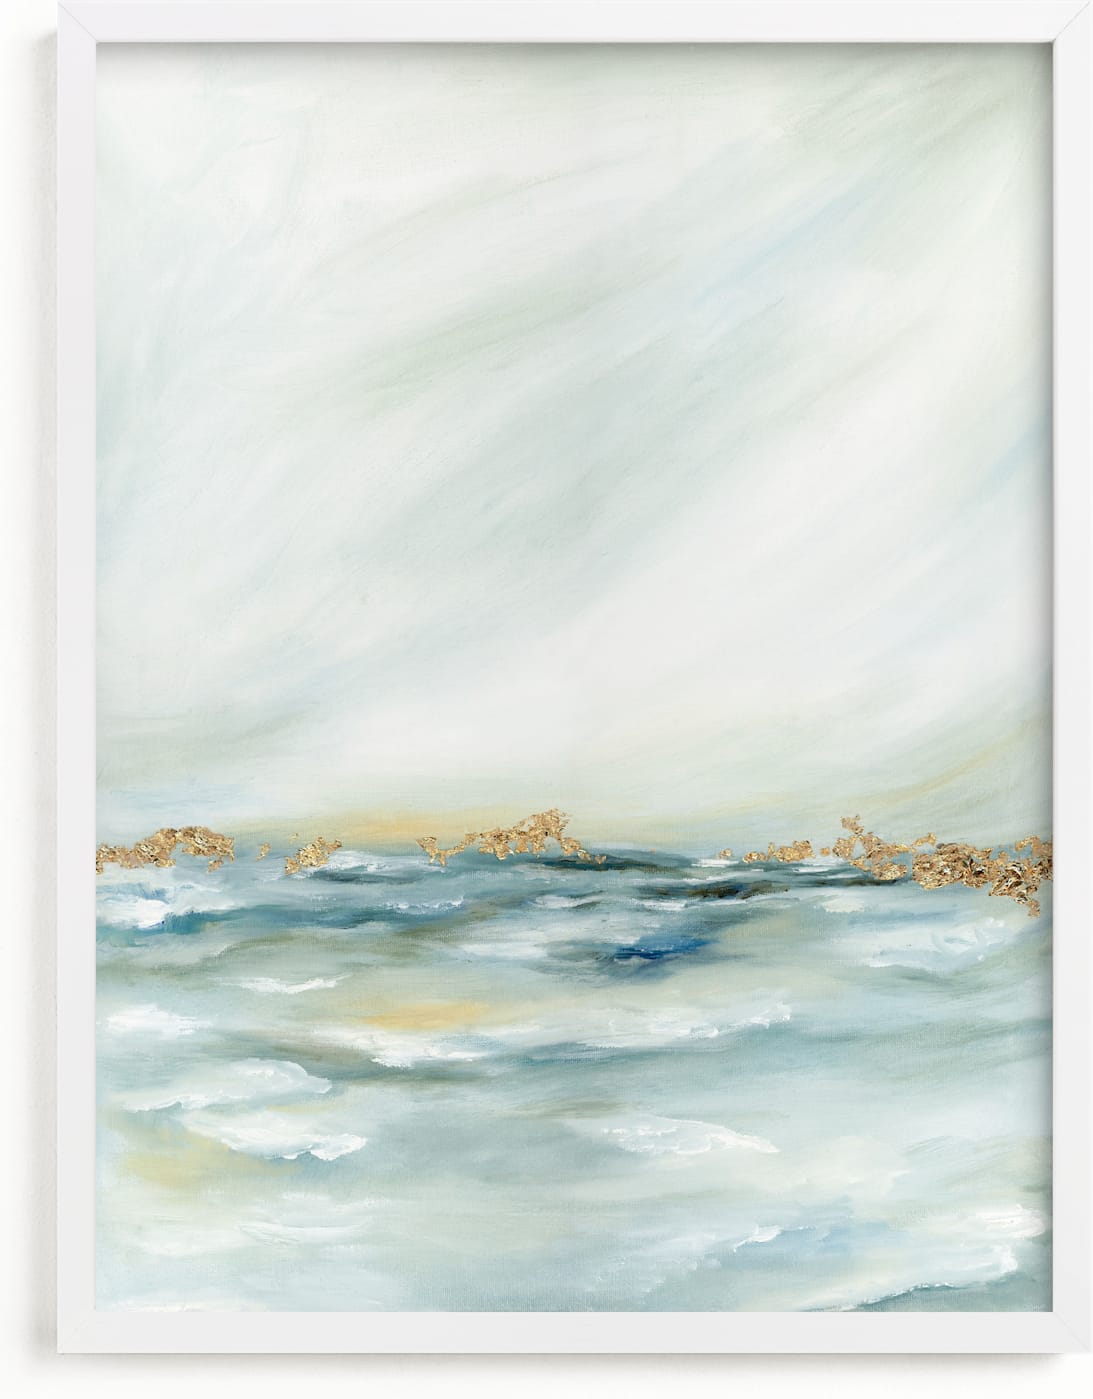 This is a blue art by Nicoletta Savod called Shimmering Coast II.